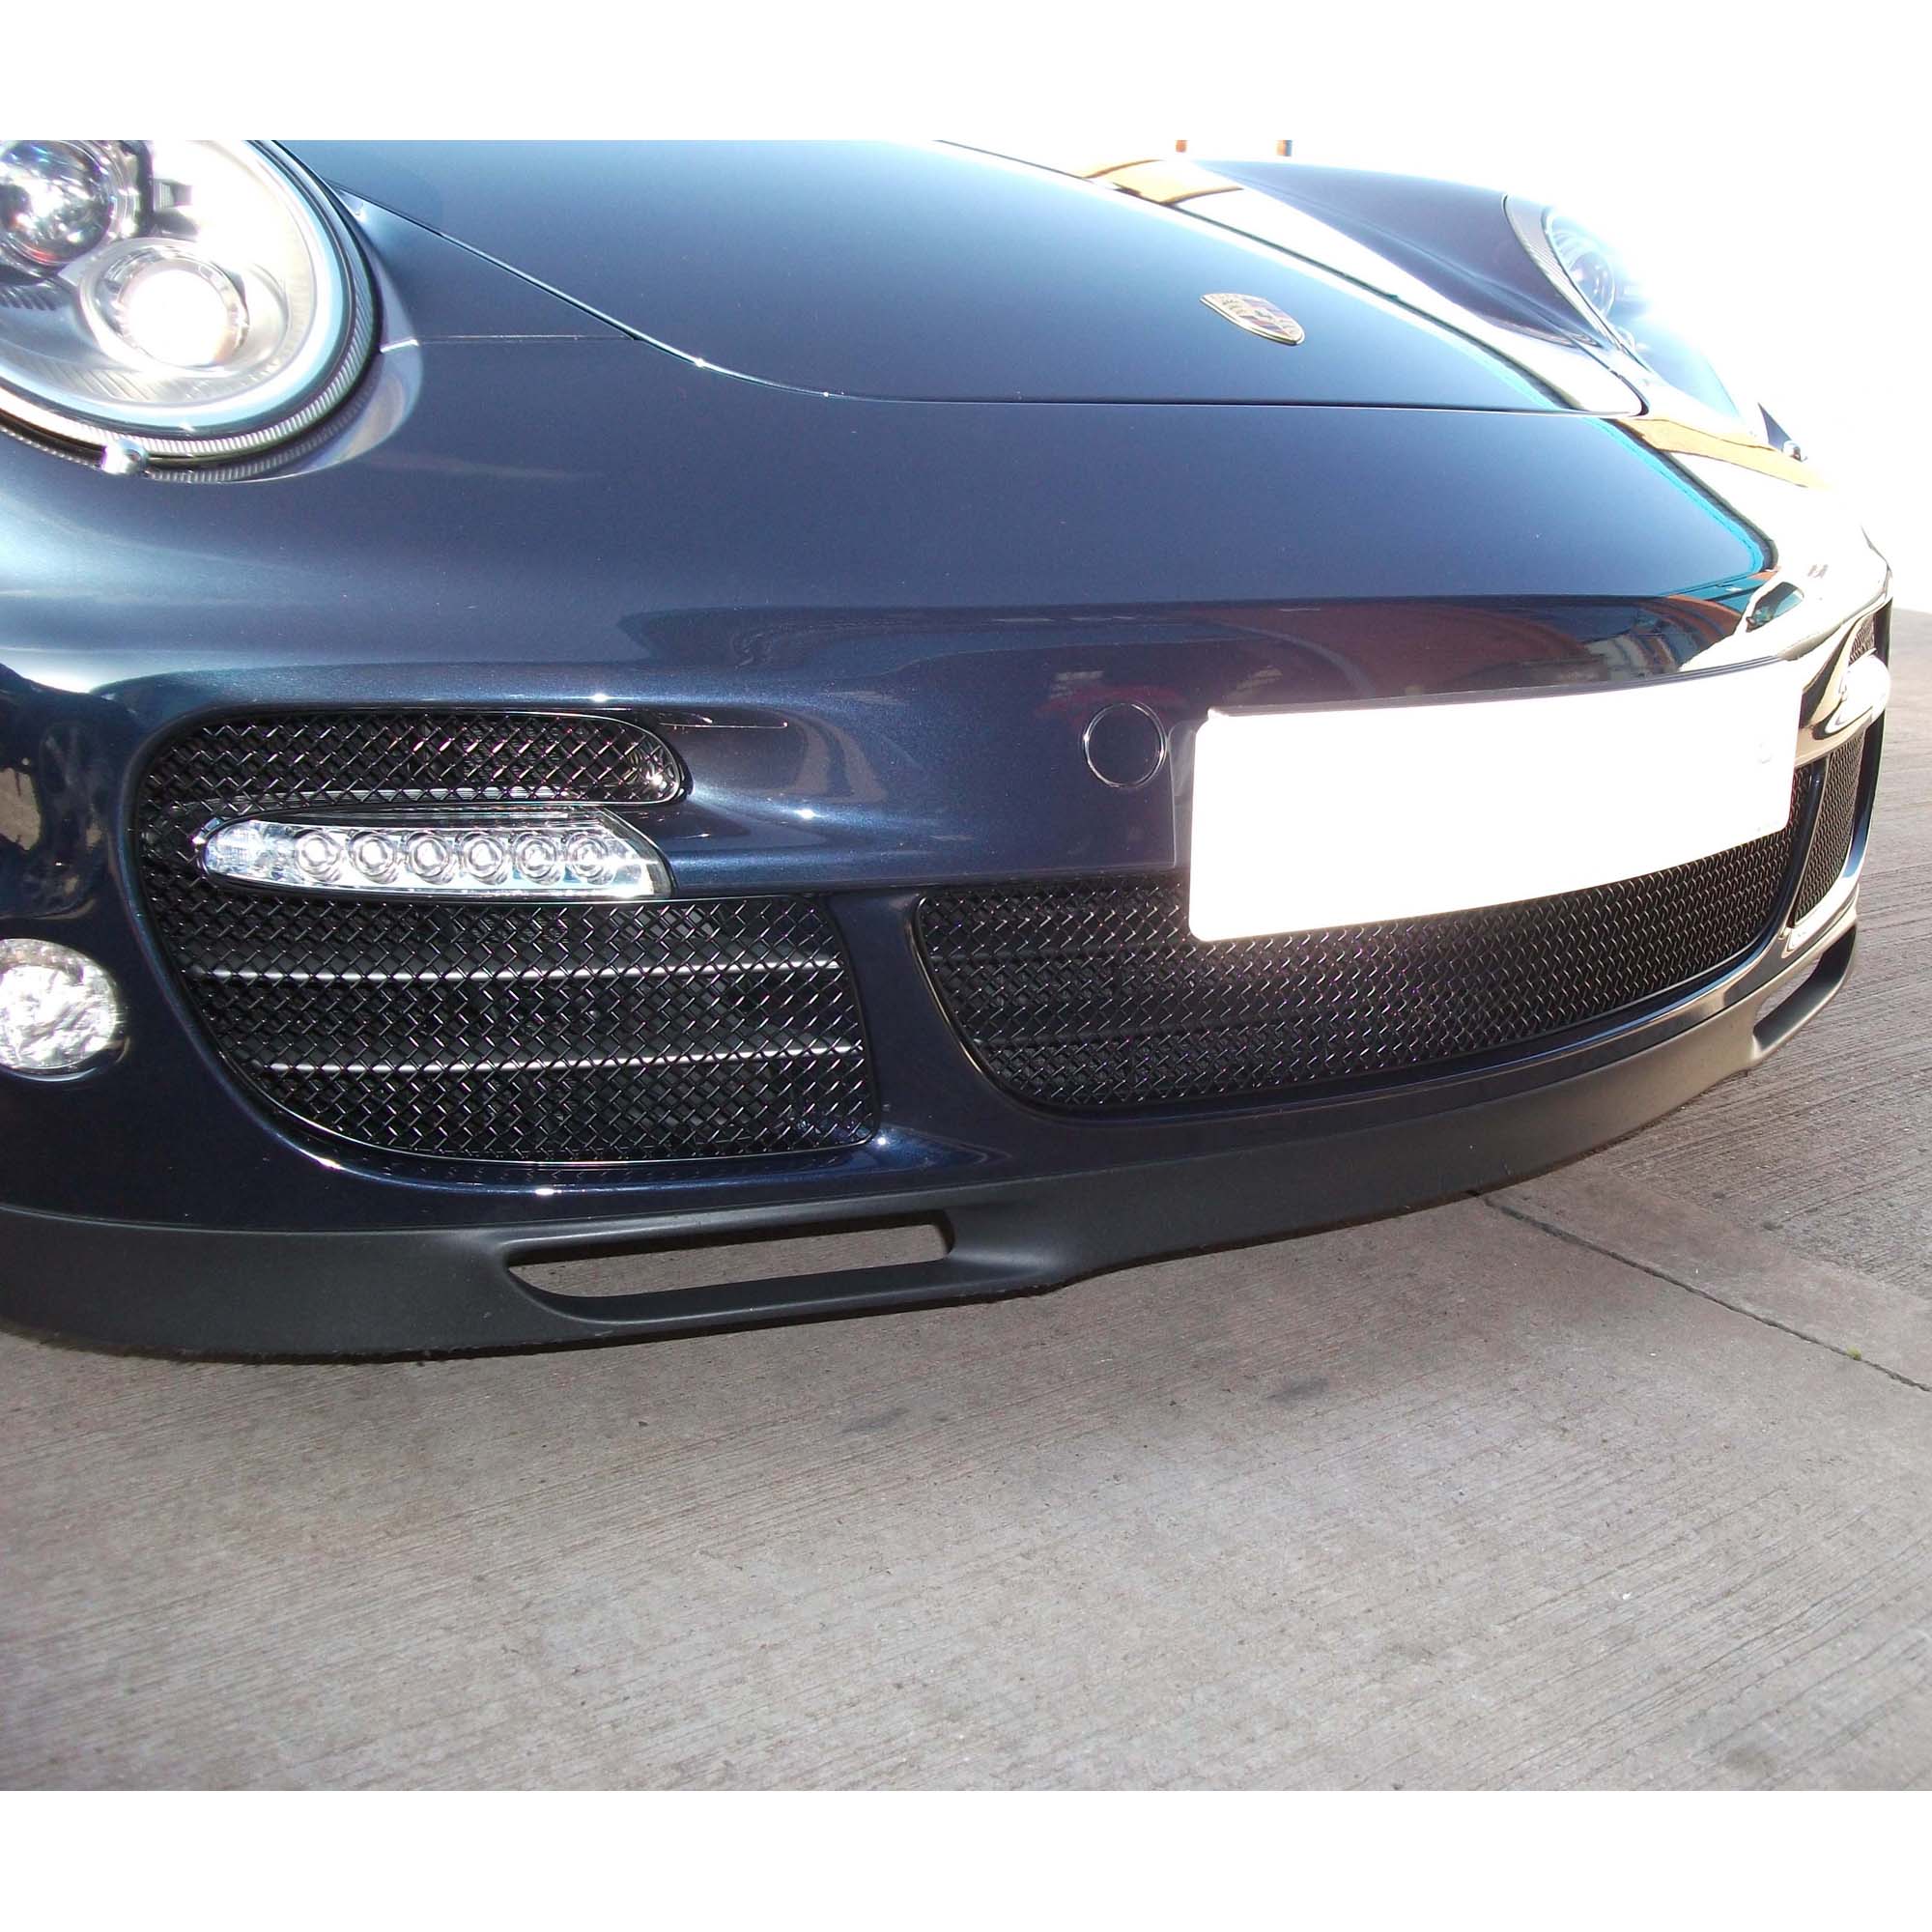 Zunsport Grille Set 2007-2013 Porsche 997.1 and 997.2 Turbo/Turbo S